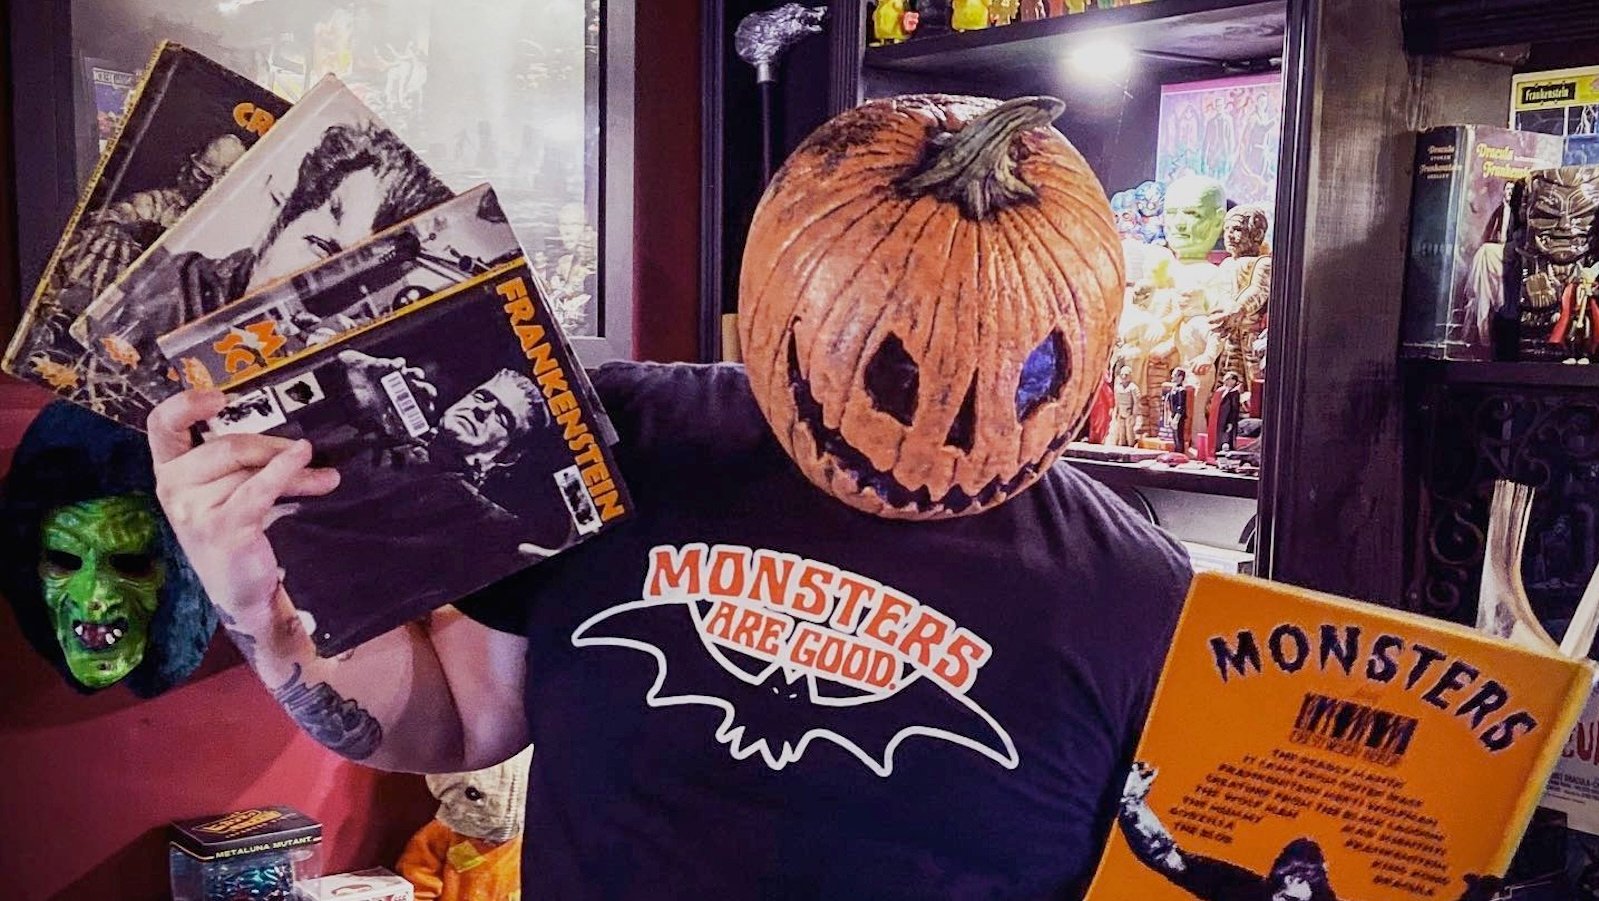 A figure wearing a Jack O Lantern mask stands in front of a shelf of monster memorabilia and holds monster movie magazines, one featuring Frankenstein's monster and another featuring King Kong.